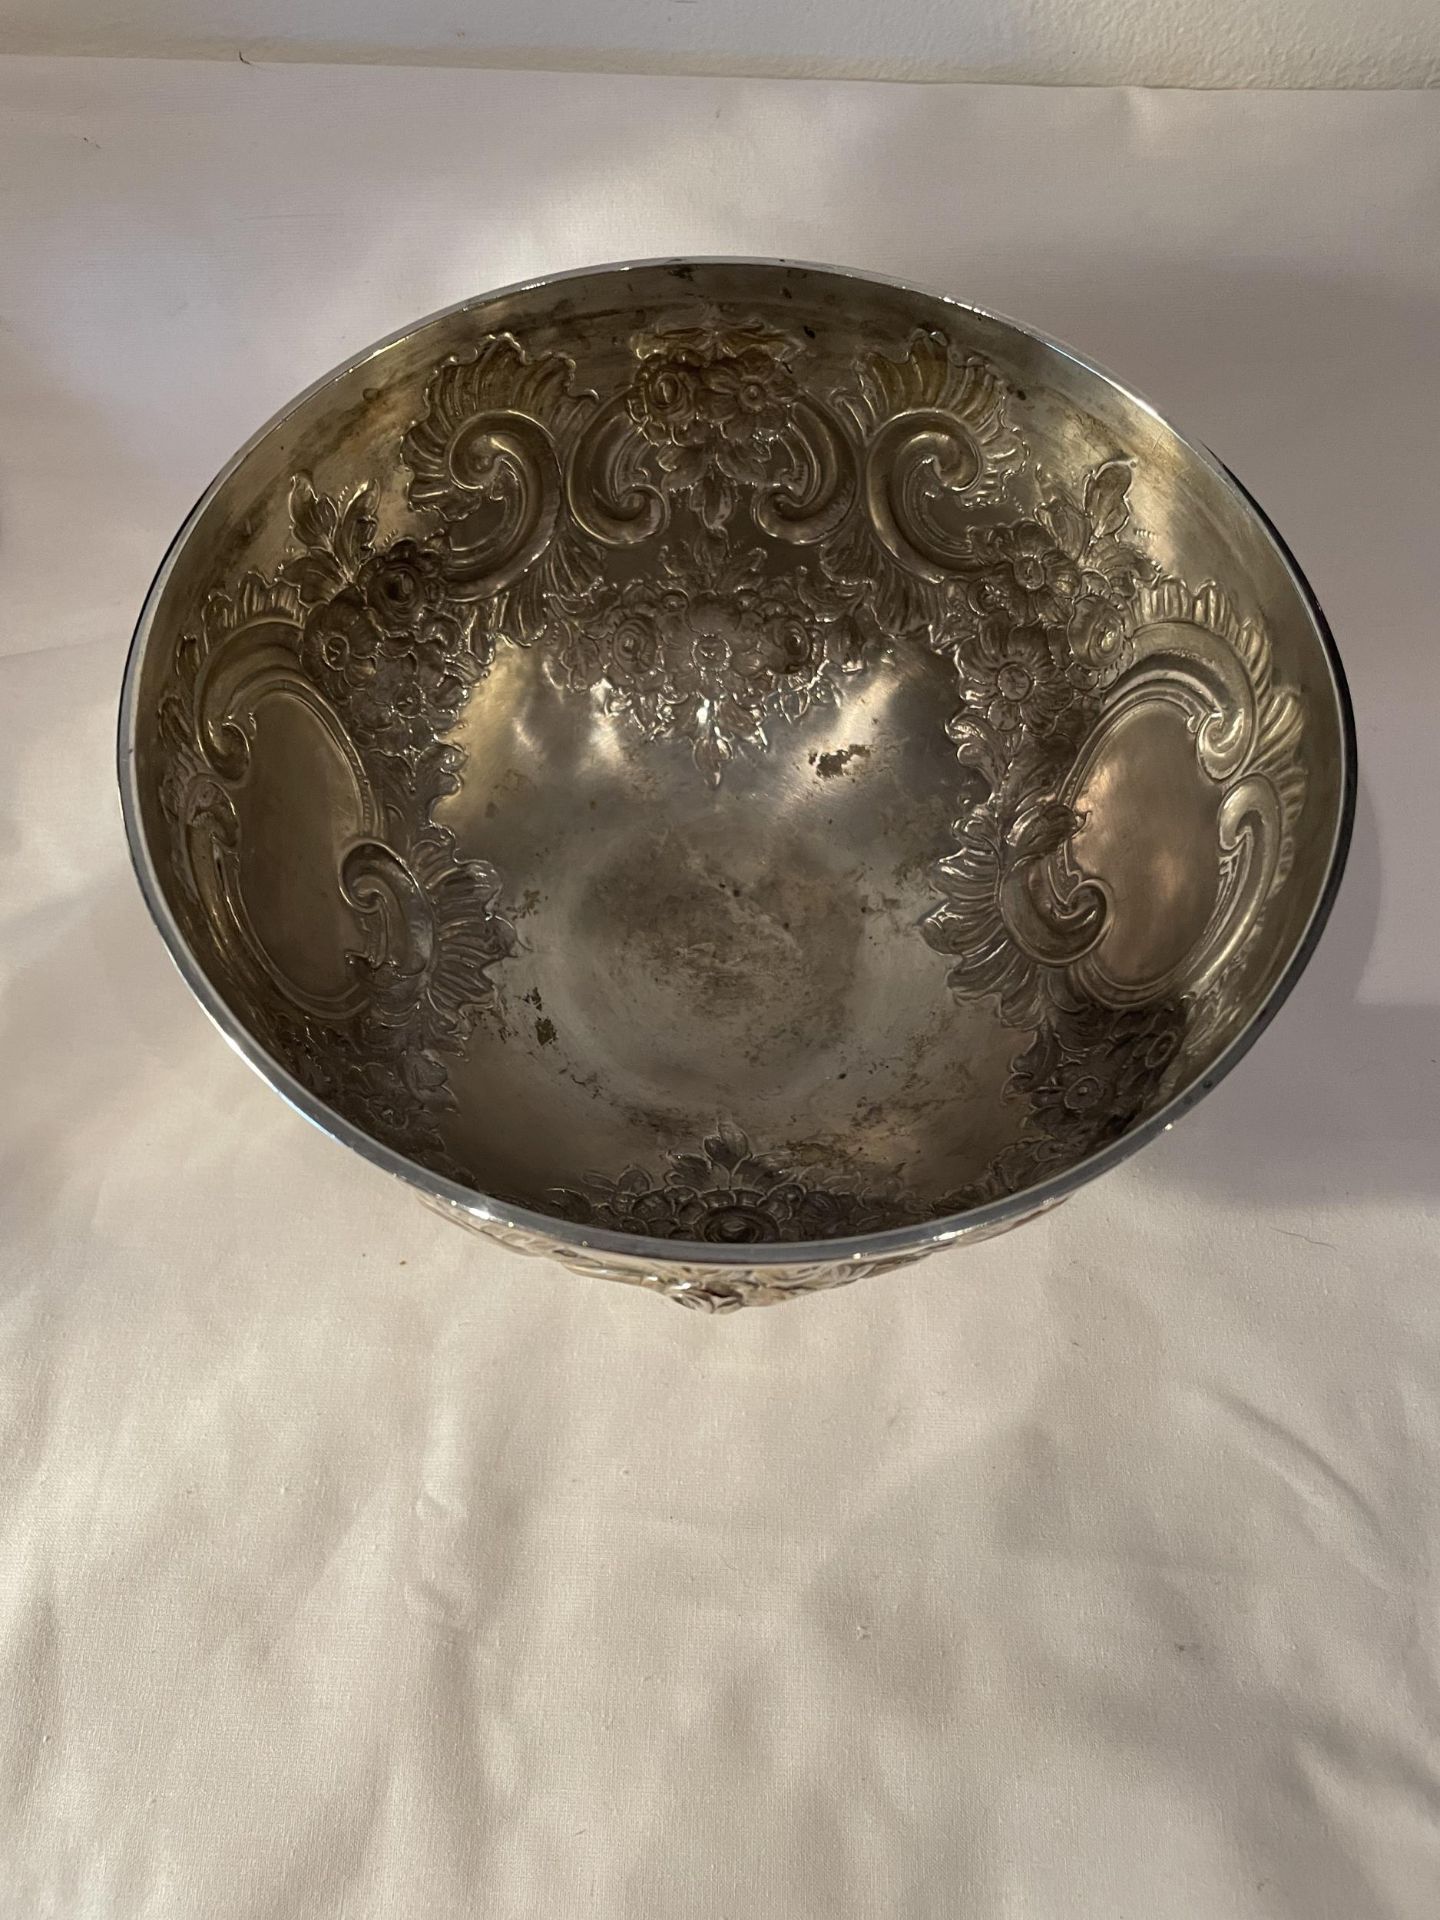 A 1901 HALLMARKED LONDON SILVER DECORATIVE FOOTED BOWL, INDISTINCT MAKER, GROSS WEIGHT 385 GRAMS - Image 7 of 15